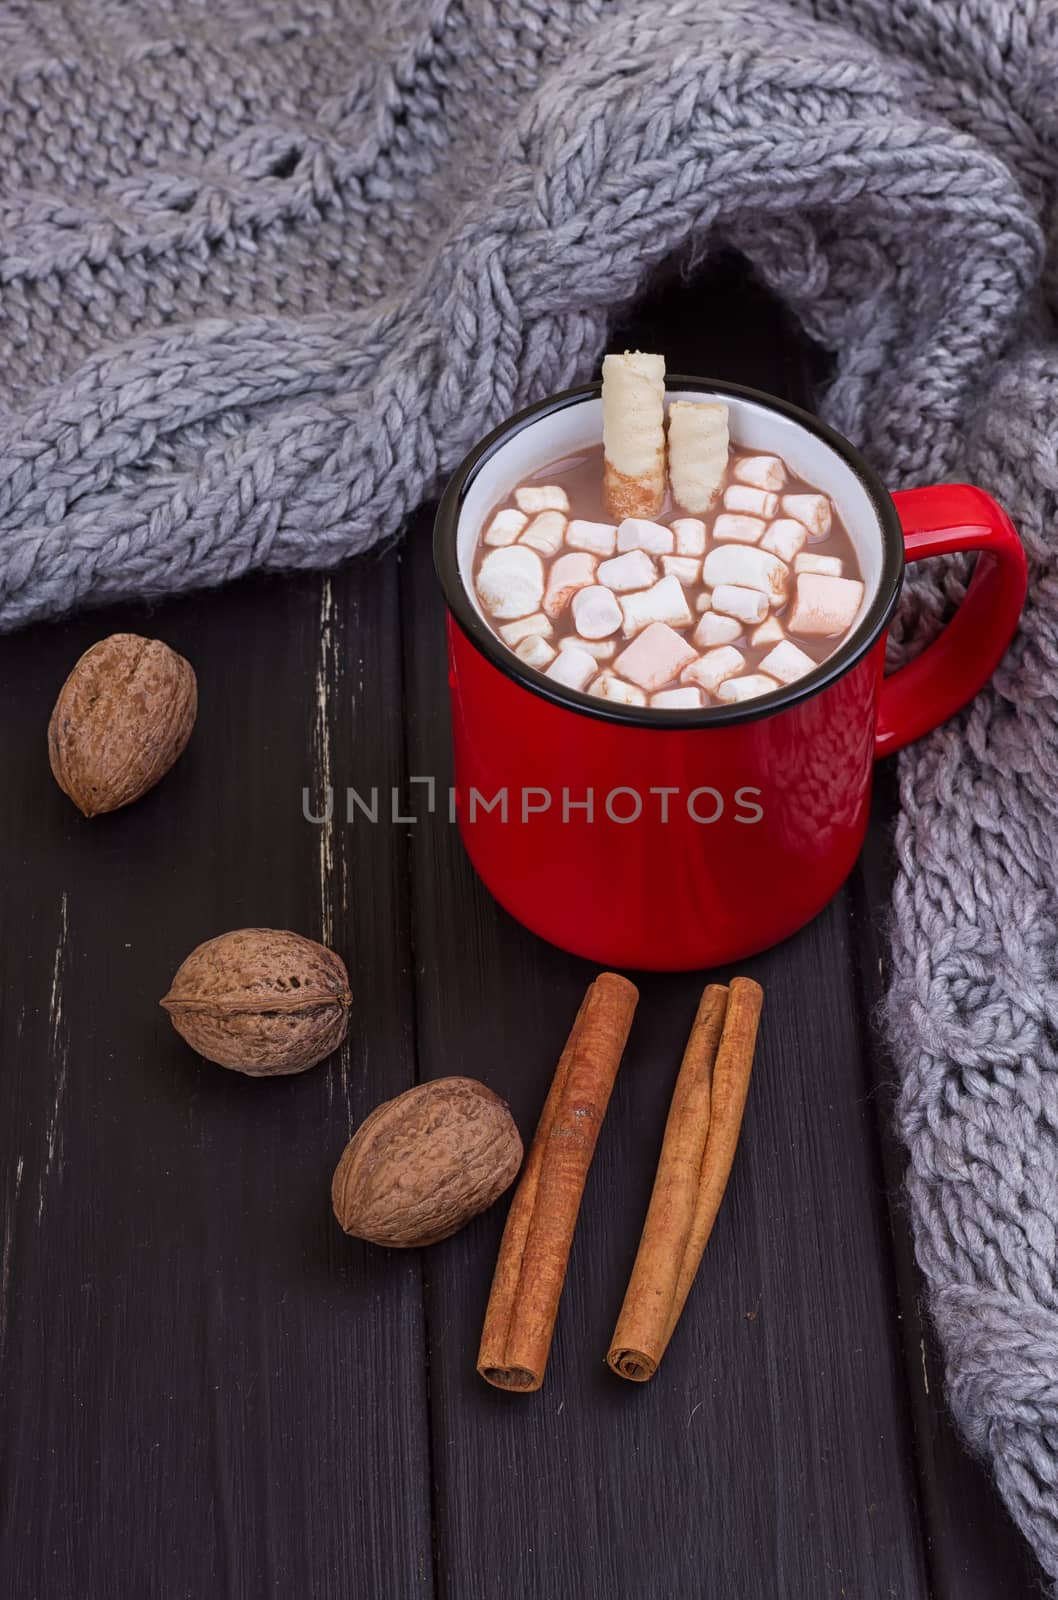 Hot cocoa with marshmallows with spices on the old wooden boards. Coffee, cocoa, cinnamon, nuts, cozy sweater. Autumn Still Life